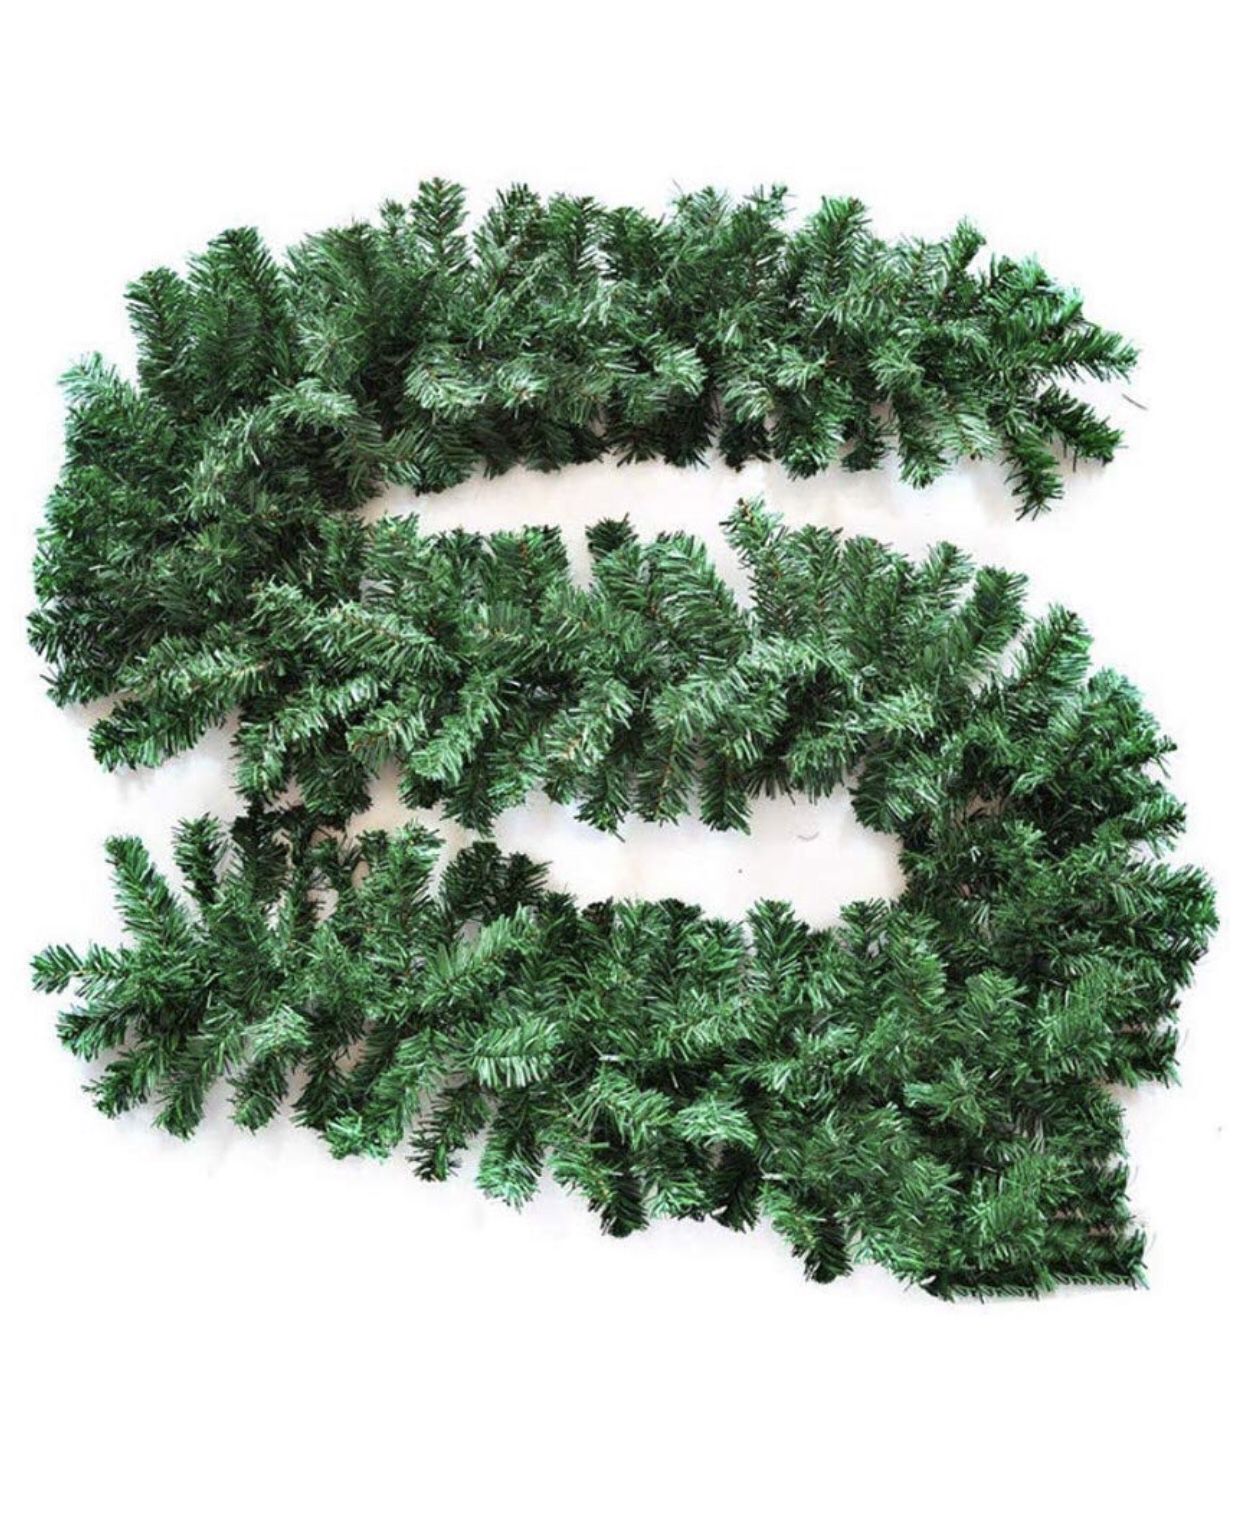 Christmas Garland 9 Feet Non-Lit Decoration for Stairs,Doorway, Fireplace, Handrails, Green, Durable